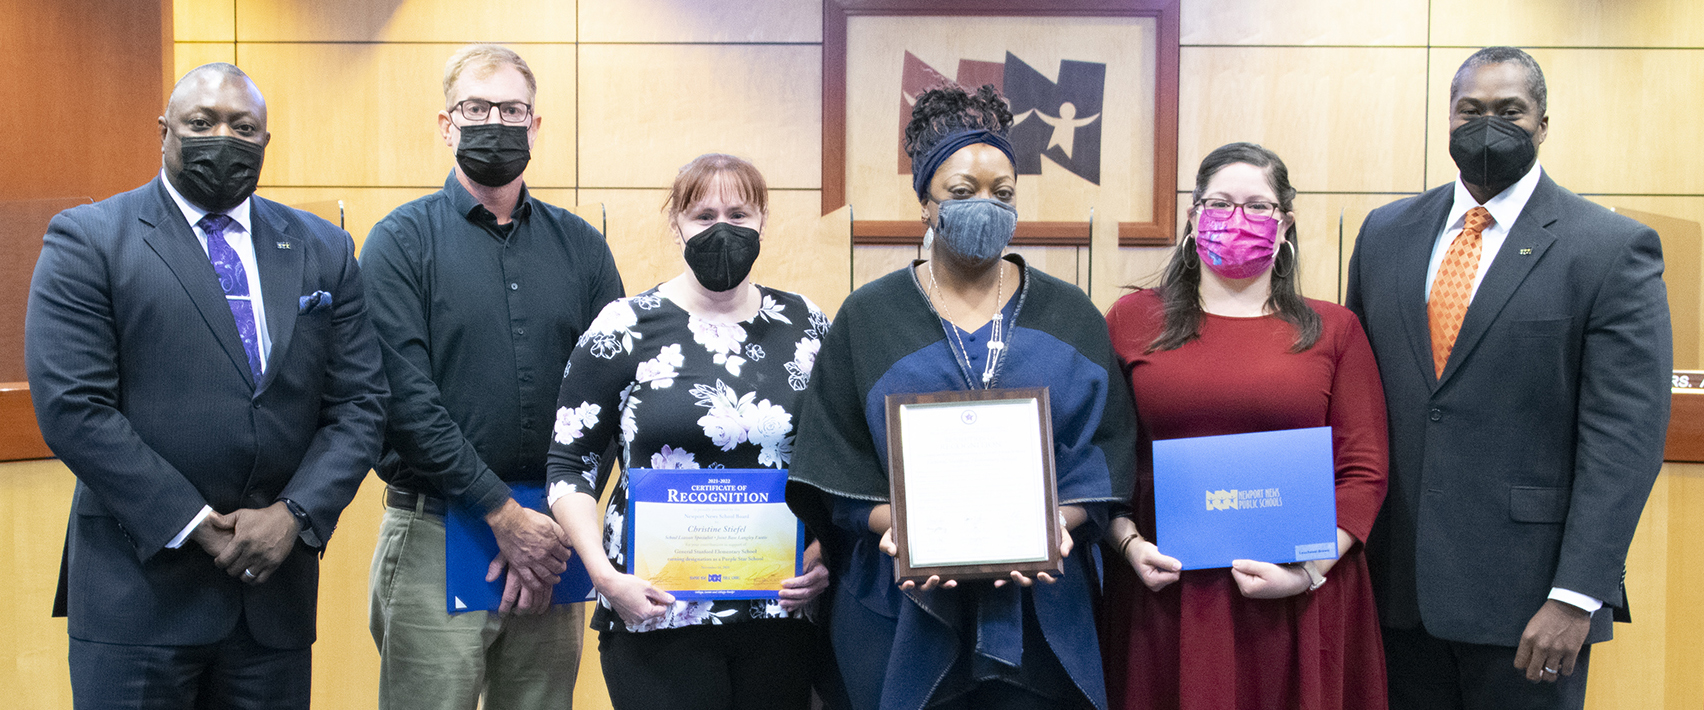 The Newport News School Board recognized administrators and members of the General Stanford Elementary faculty and staff for receiving a Purple Star award from the Virginia Department of Education. The school earned the accolade for its support of military-connected students and their families.